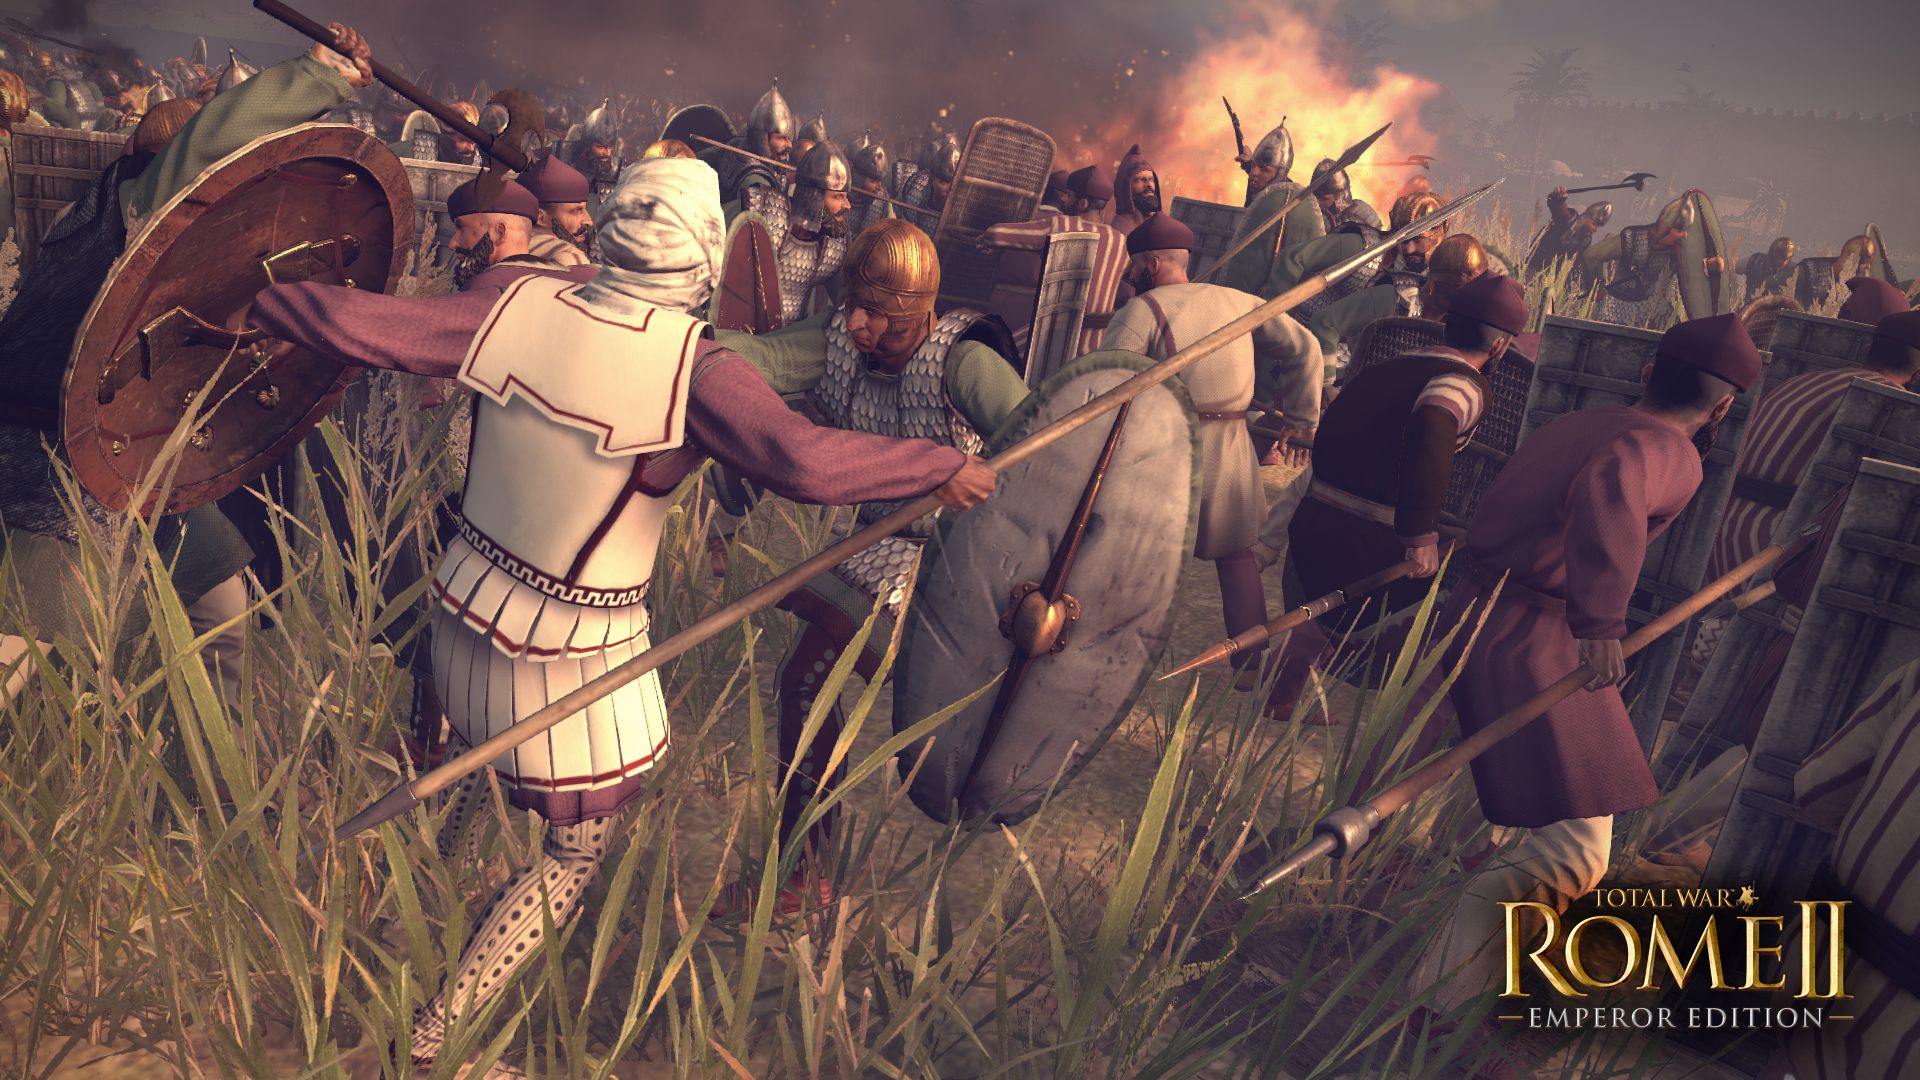 Image for Total War: Rome 2 Emperor Edition has a release date 